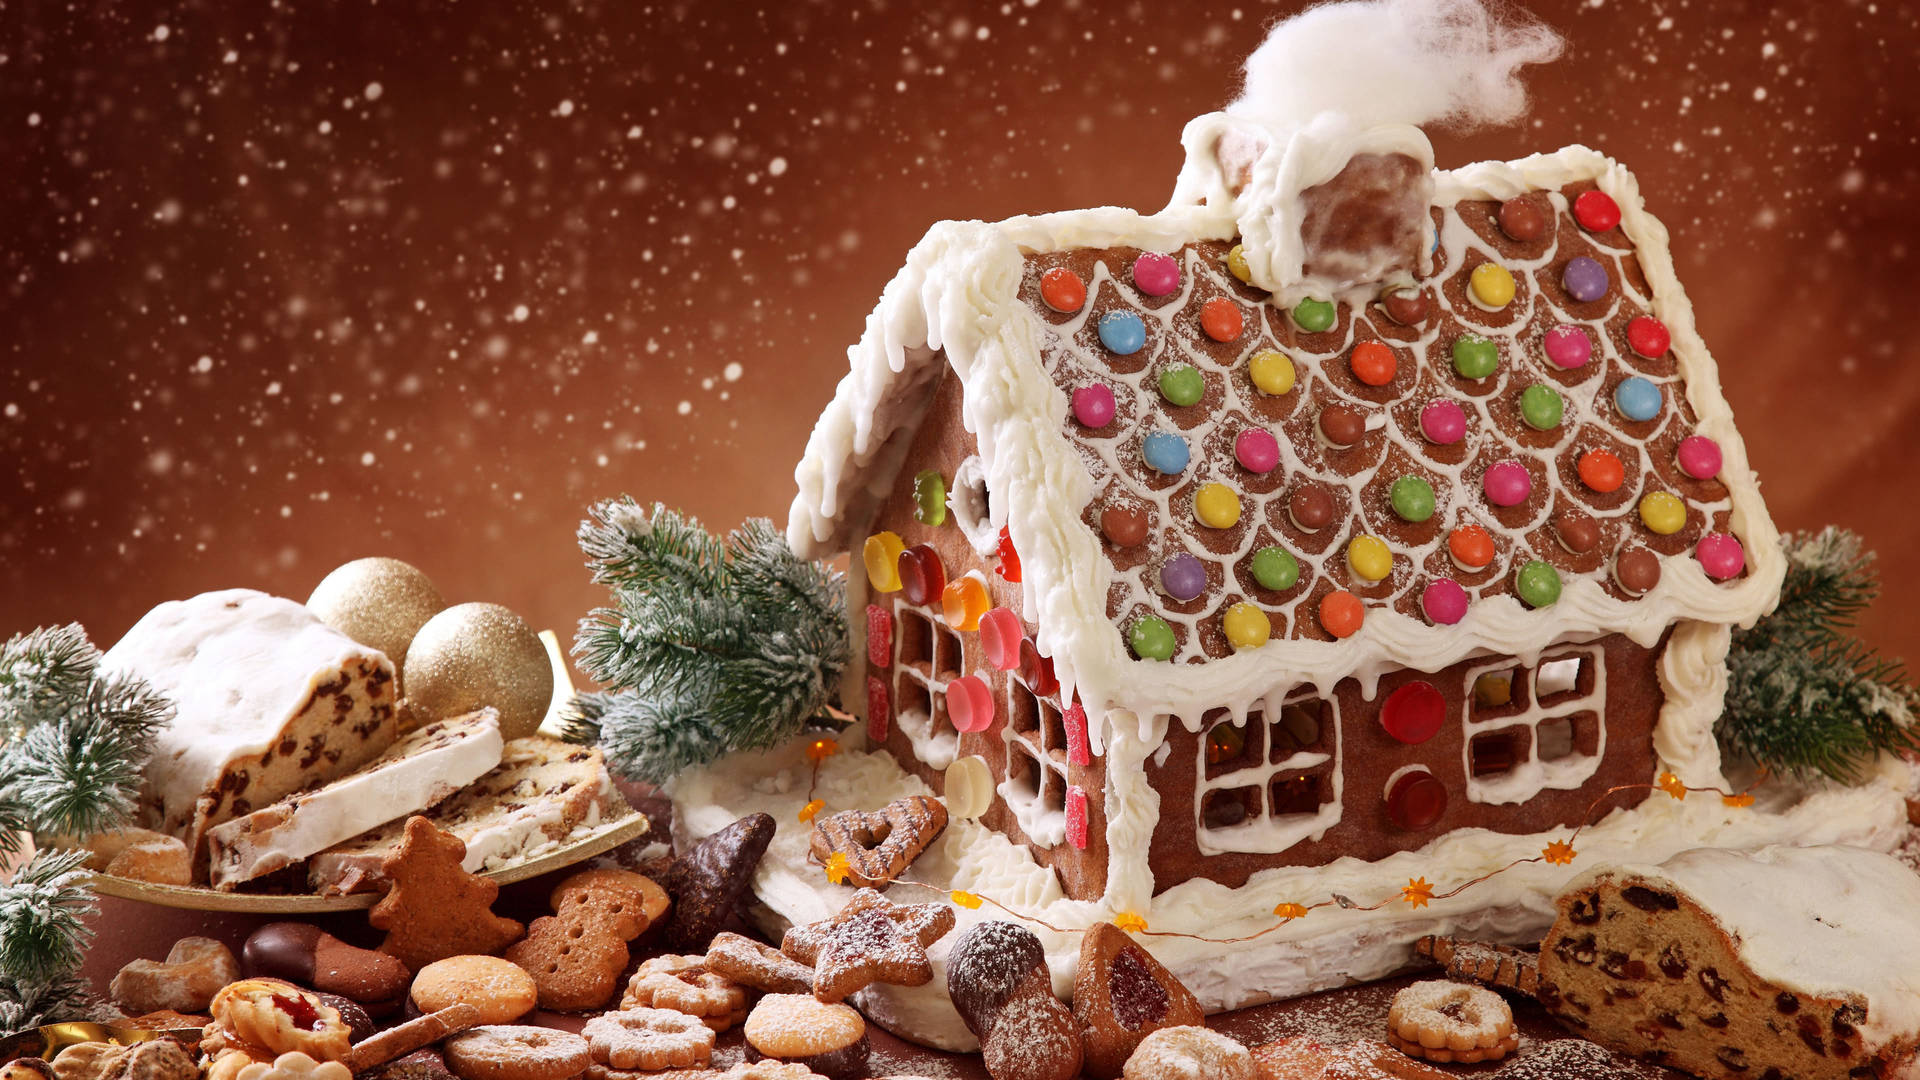 Delectable Gingerbread Chocolate House